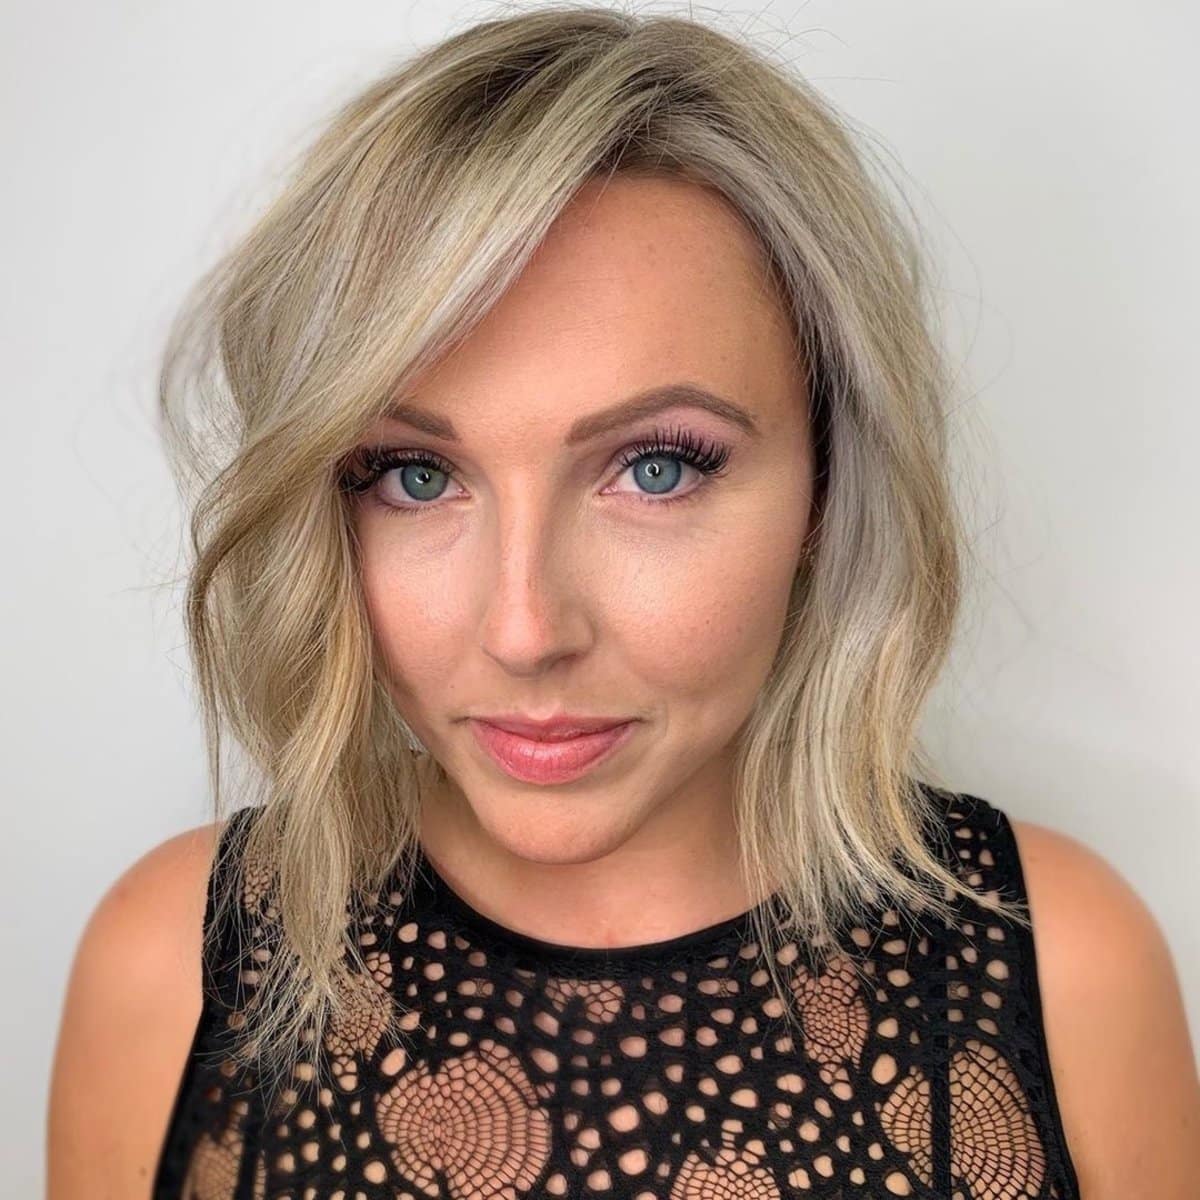 Stunning shorter blunt bob haircut with a side part